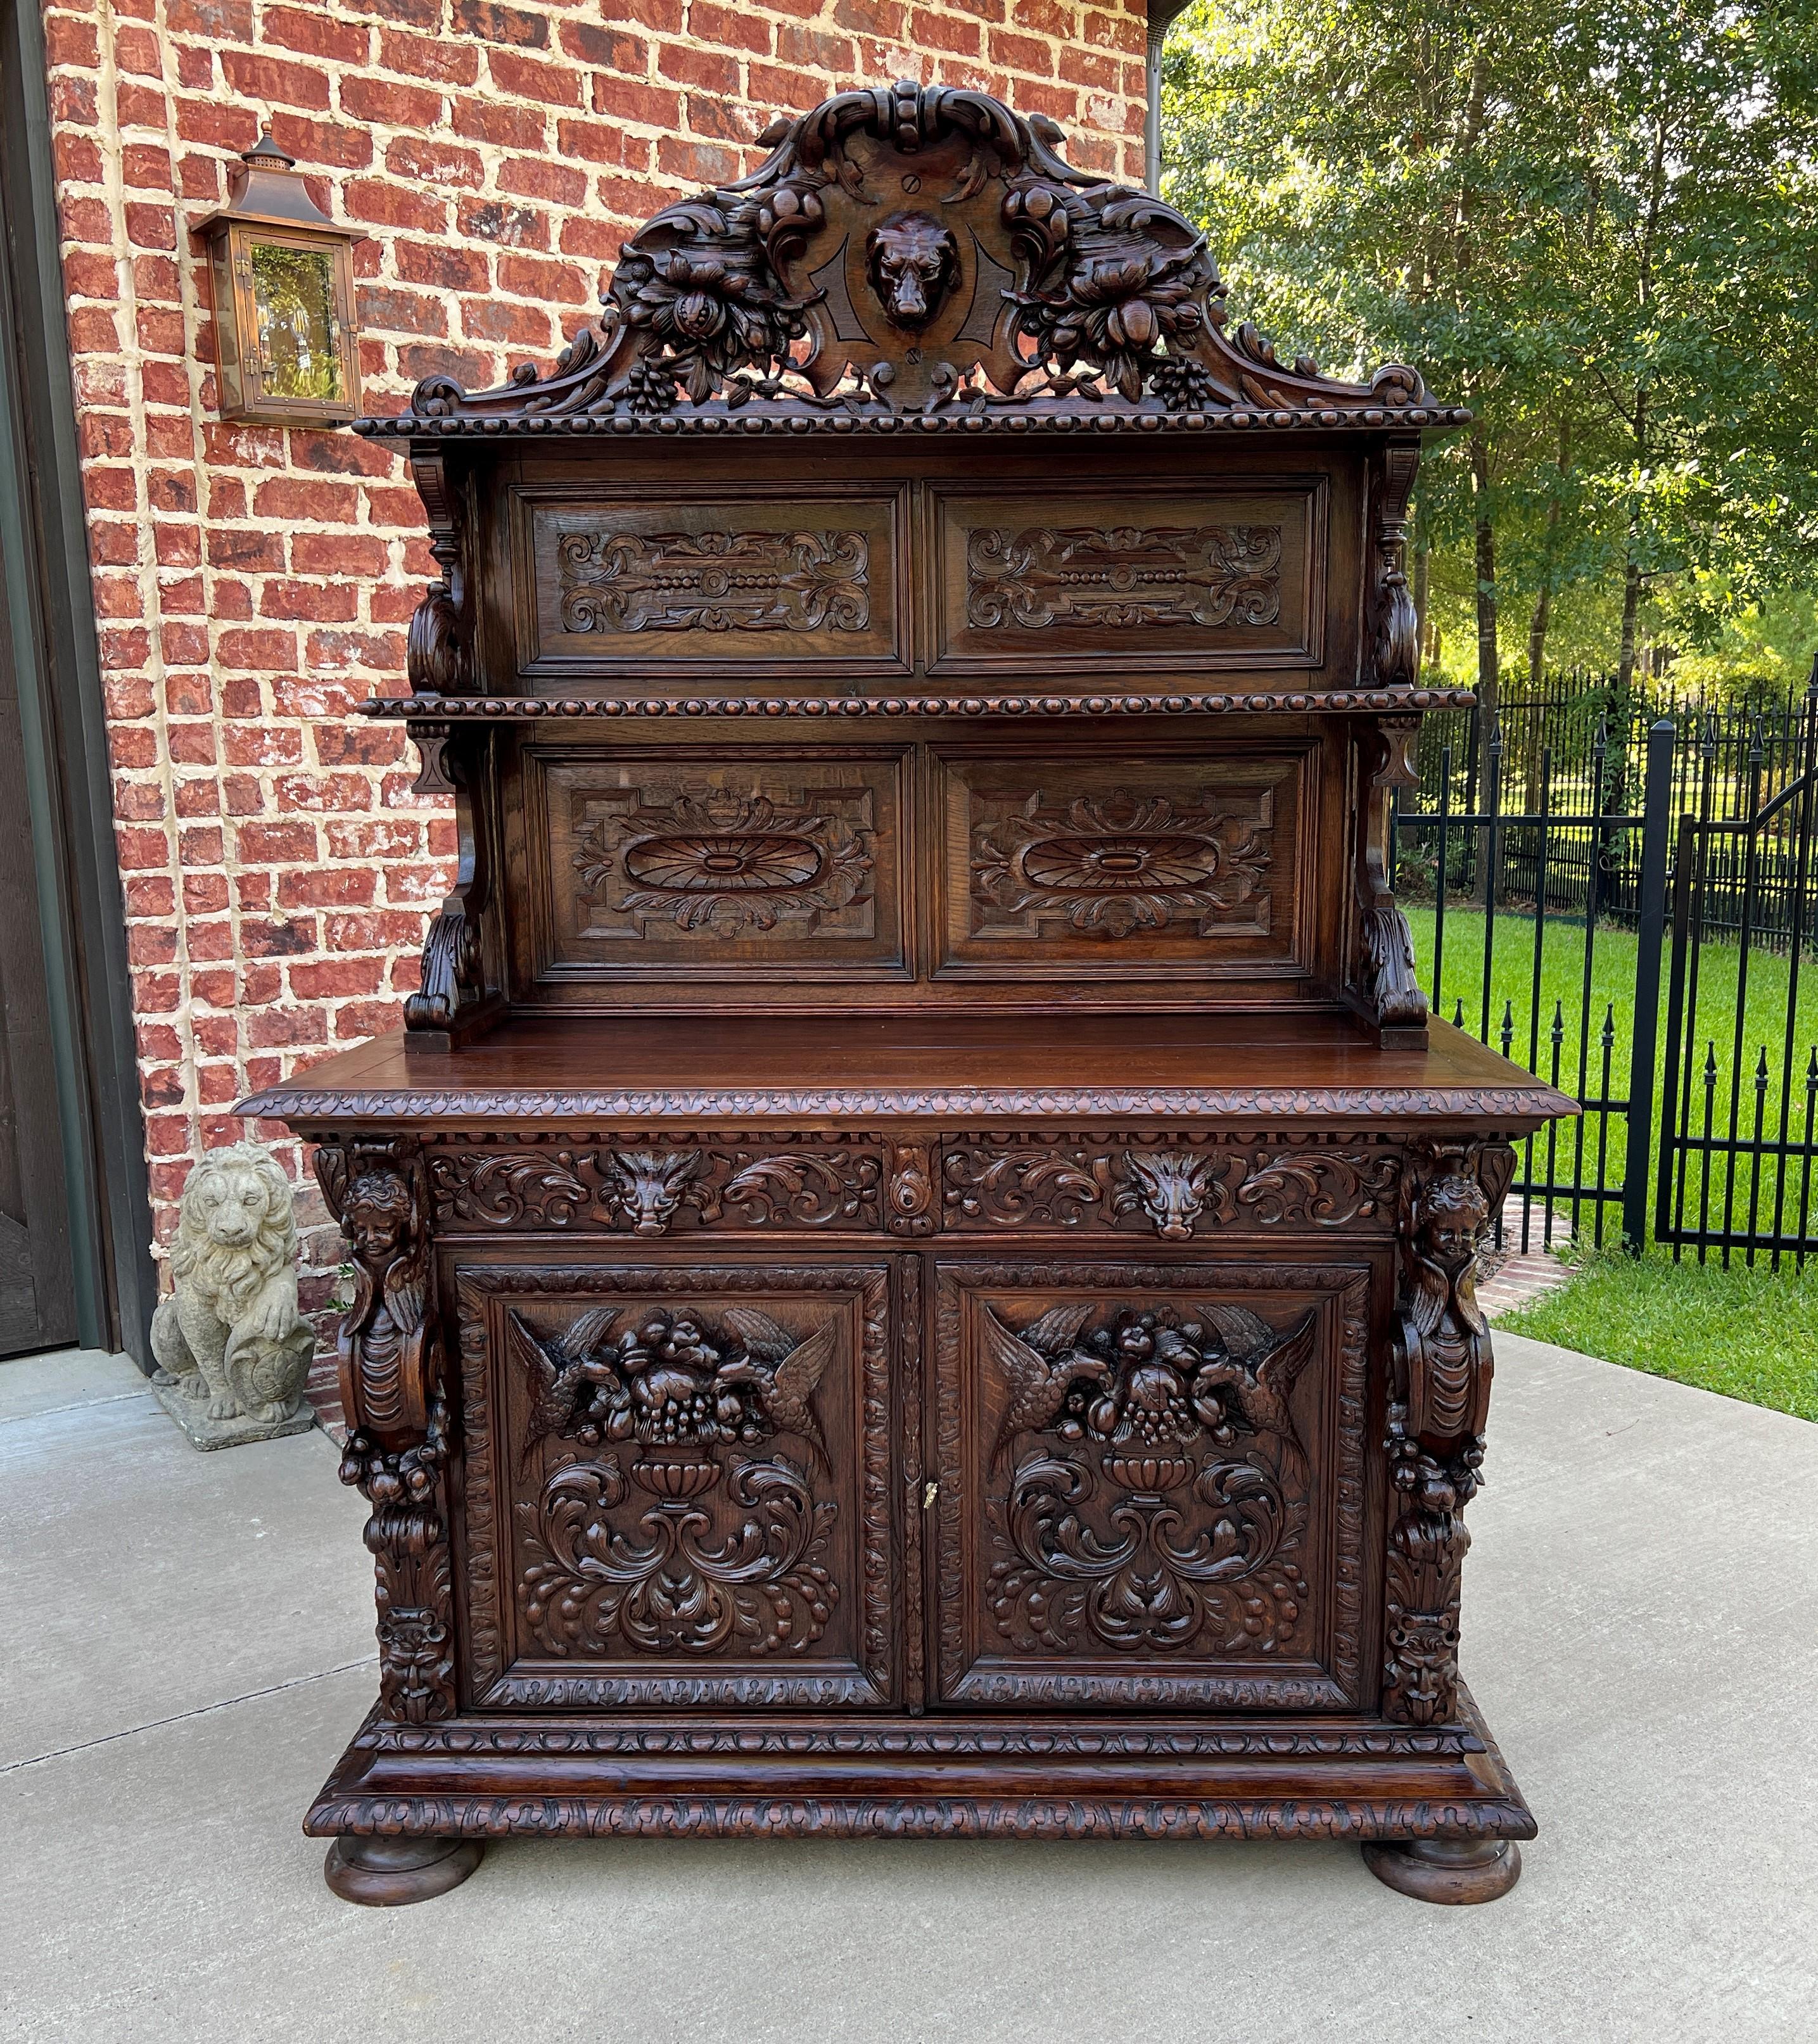 Superb 19th century antique french oak 3-tier black forest server sideboard buffet cabinet~~lion mask and love birds~~
c. 1880s 

This is only one of multiple exquisite pieces recently received from our European shipper~~wonderful hand-carved oak